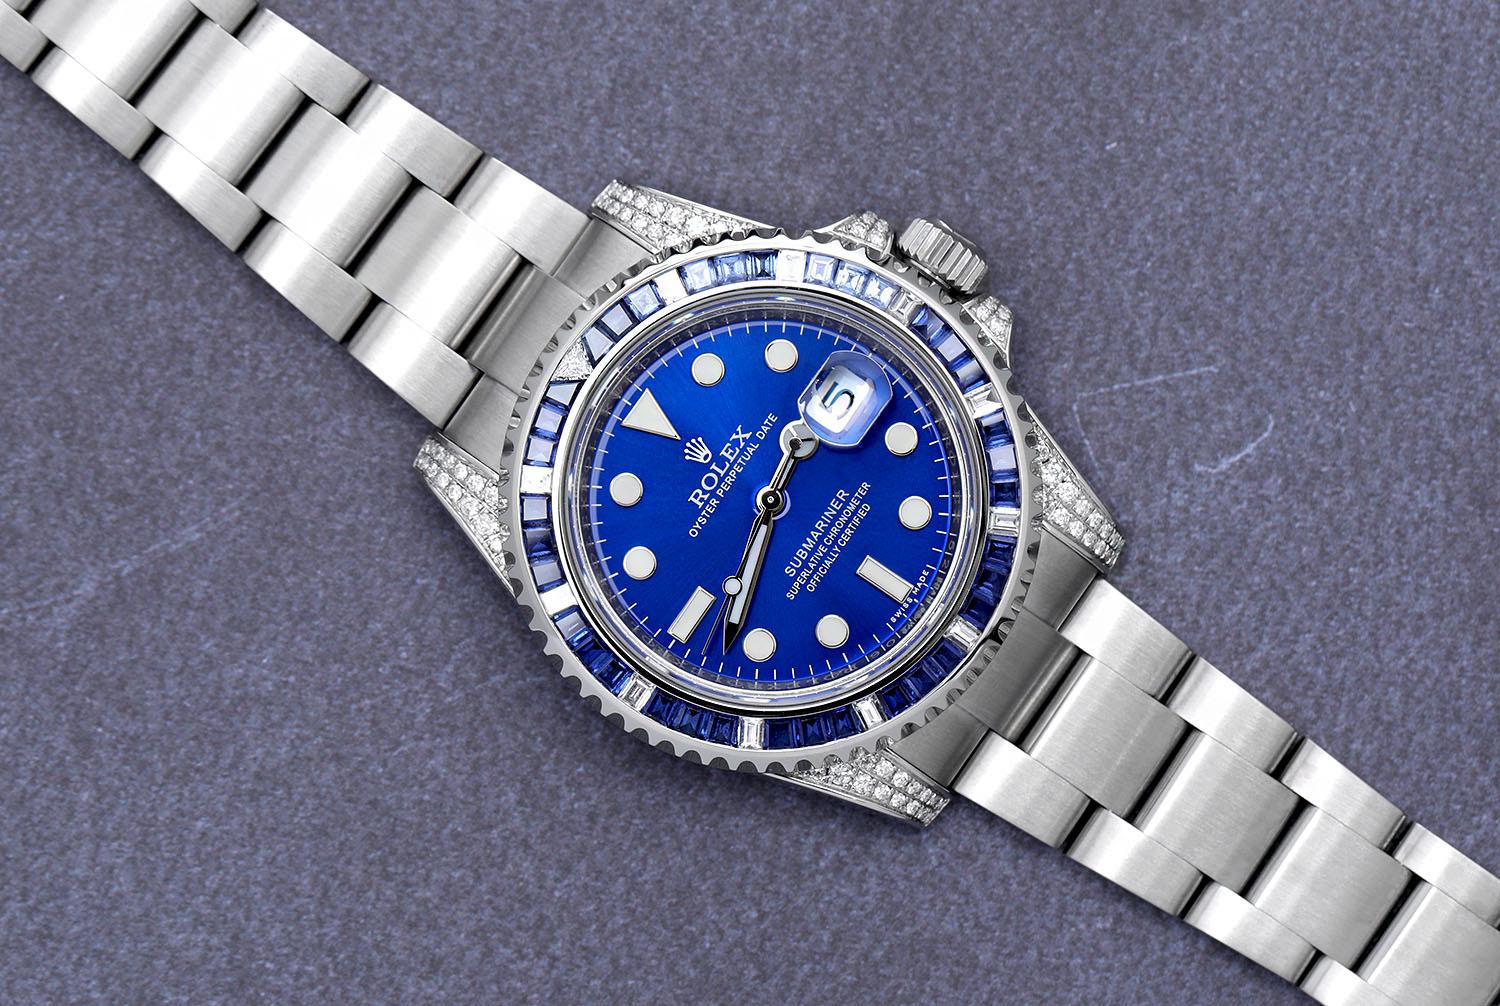 Rolex Submariner Date Custom Diamond Stainless Steel Watch with Sapphire/Diamond Bezel Lugs and Blue Dial 116610. Watch has been professionally polished and has never been worn after customization. There are absolutely NO visible scratches or